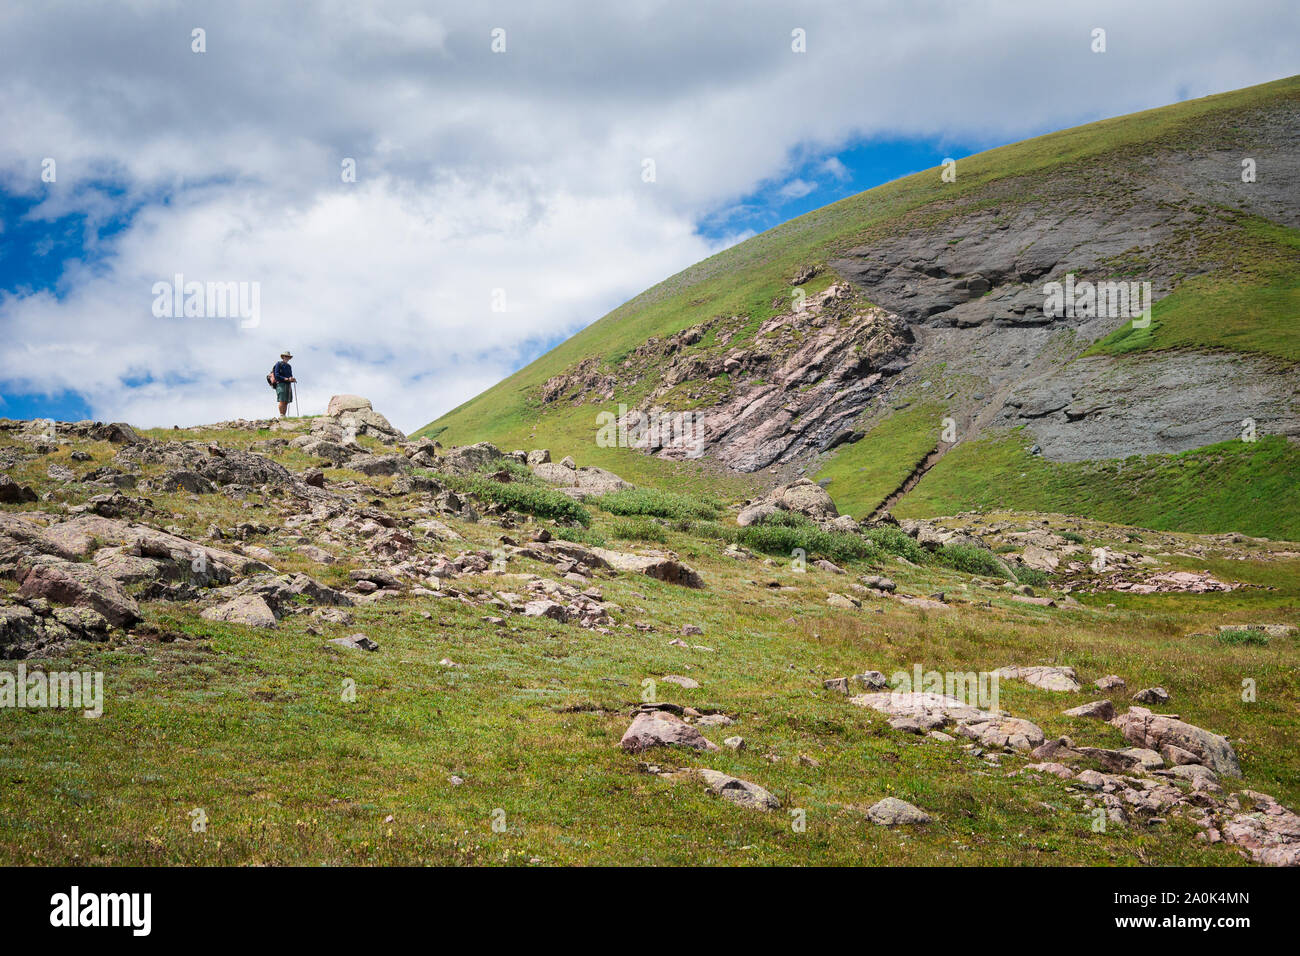 Lone hiker on a ridge above tree line in the San Juan Mountains, Weminuche Wilderness, Rocky Mountains, Colorado, USA Stock Photo